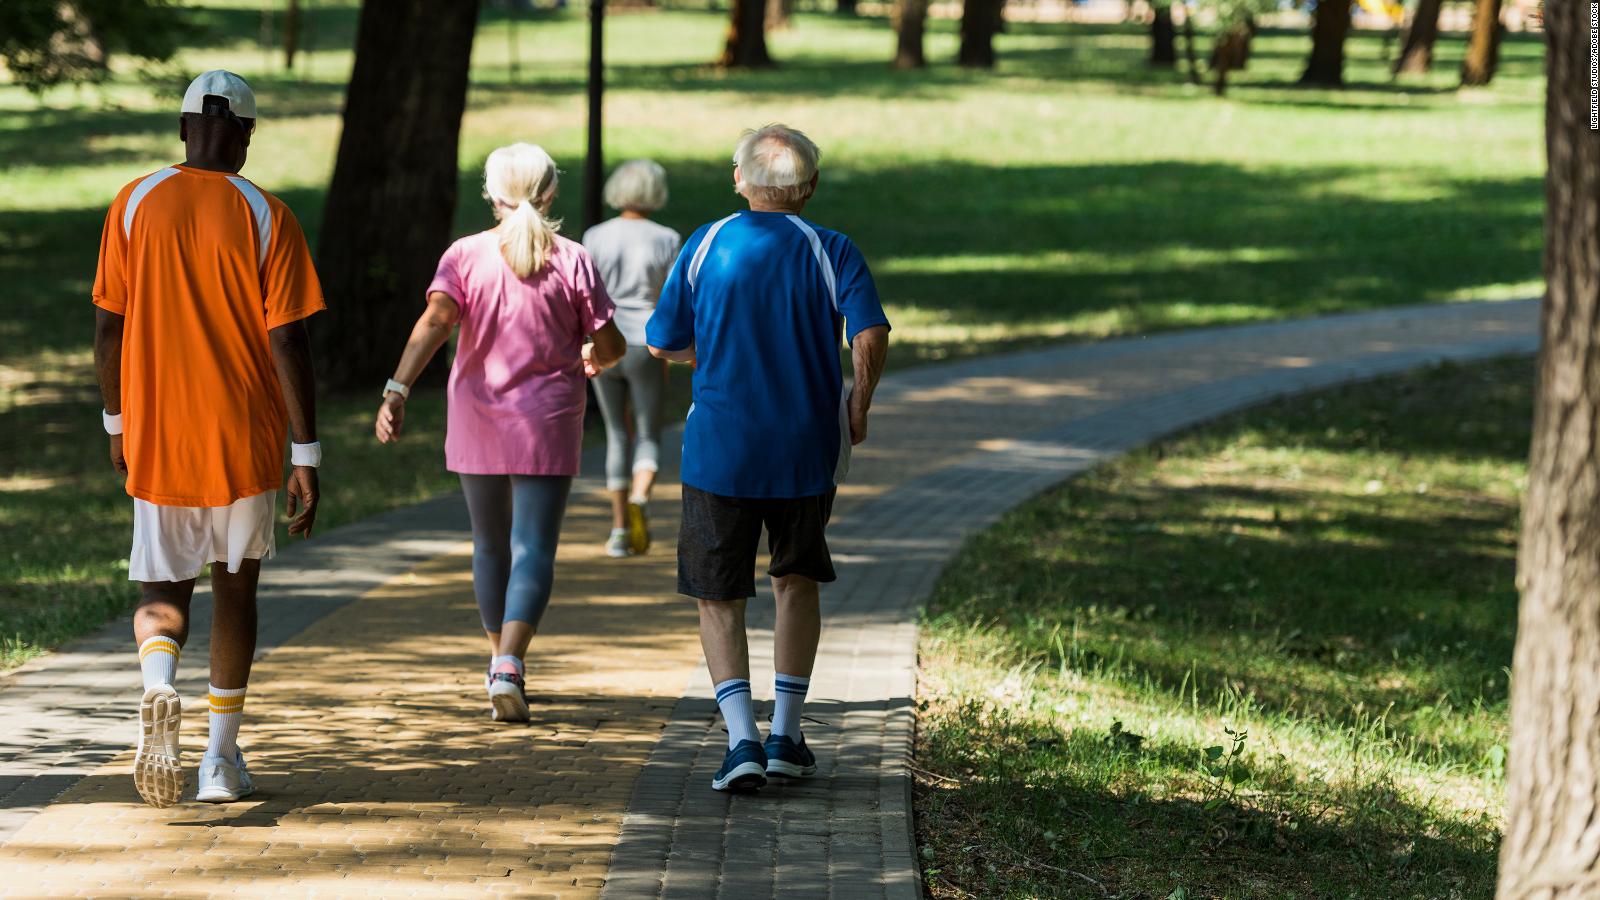 The speed at which you walk may be a sign of dementia